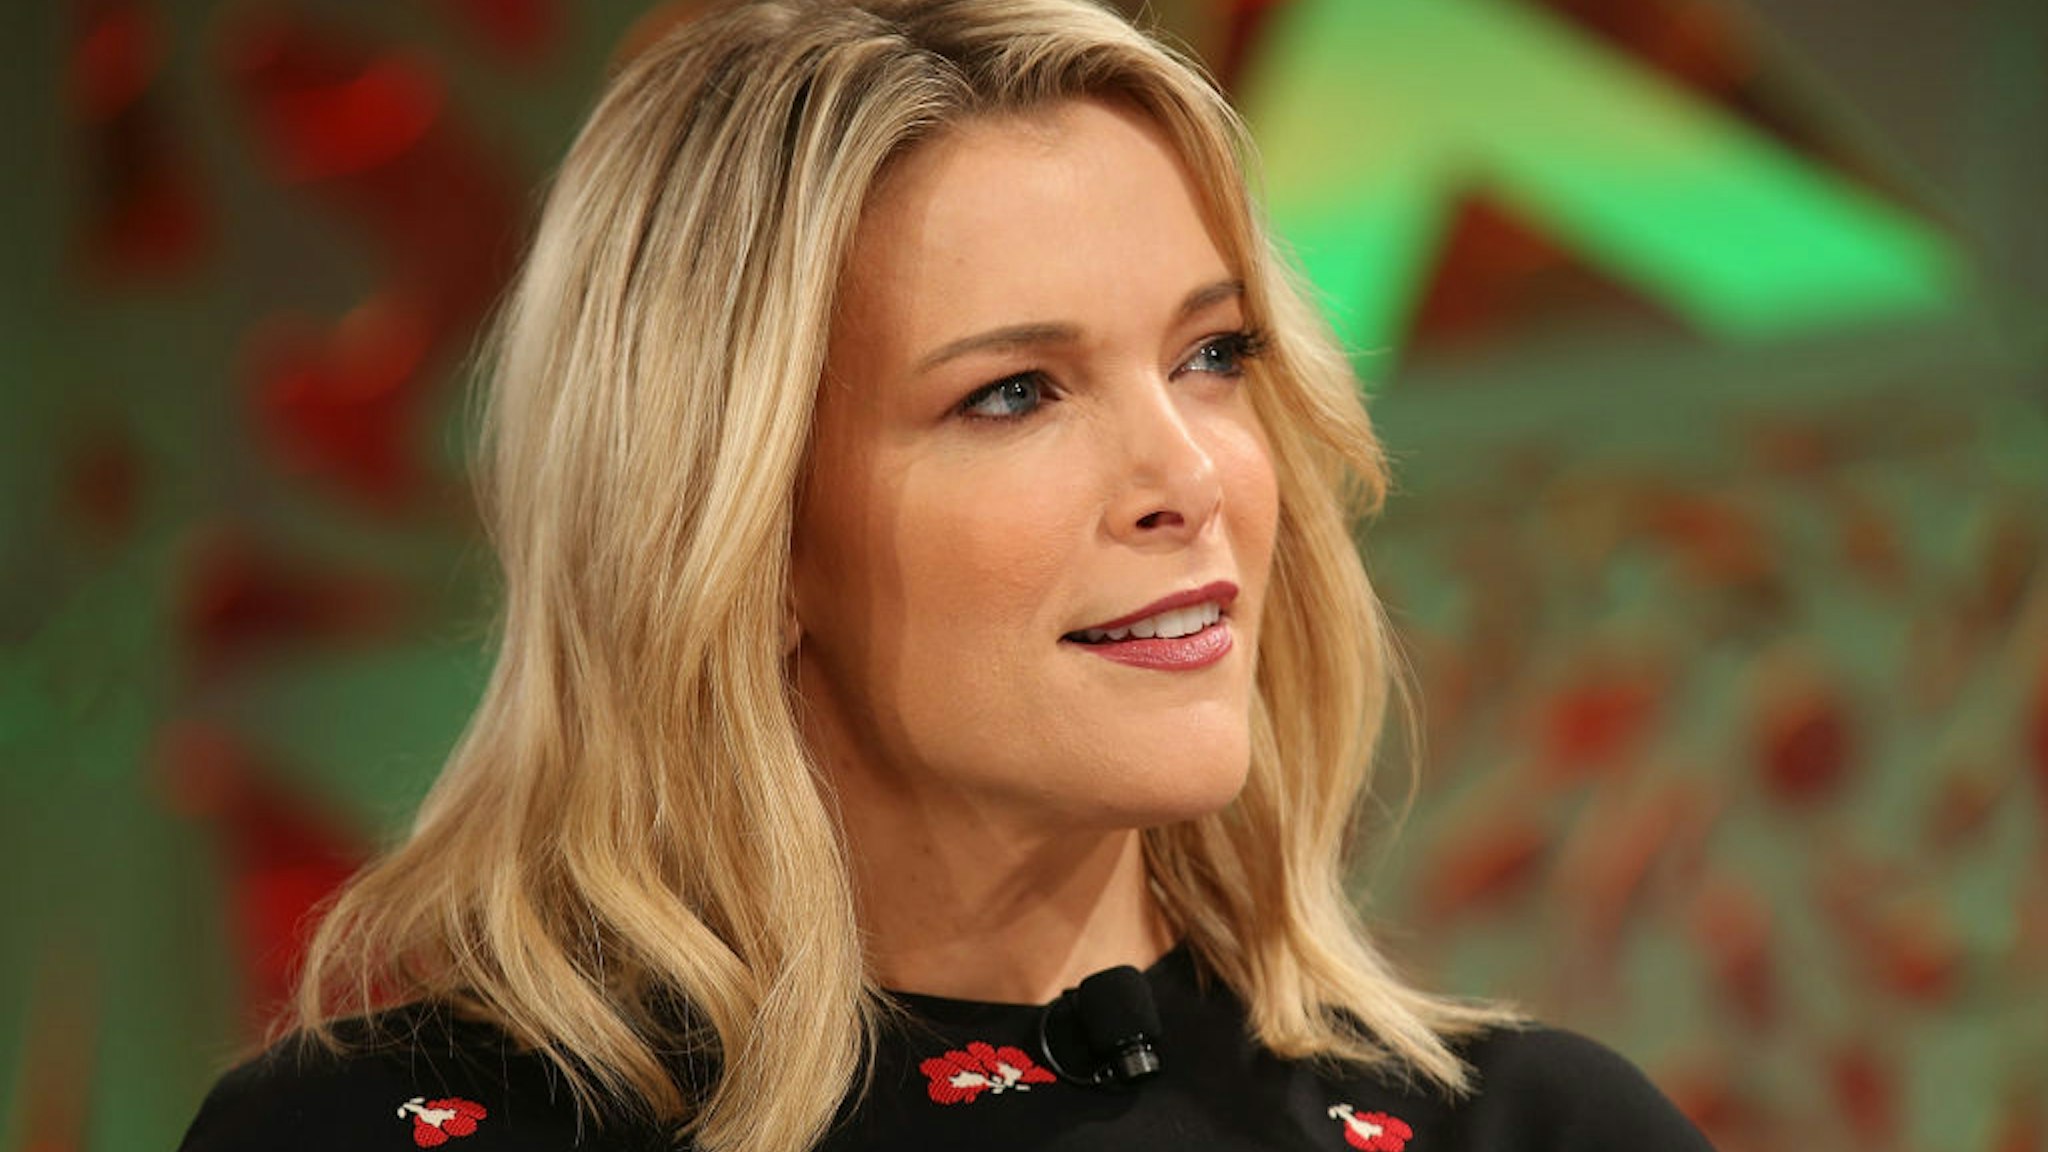 Megyn Kelly speaks onstage at the Fortune Most Powerful Women Summit 2018 at Ritz Carlton Hotel on October 2, 2018 in Laguna Niguel, California.